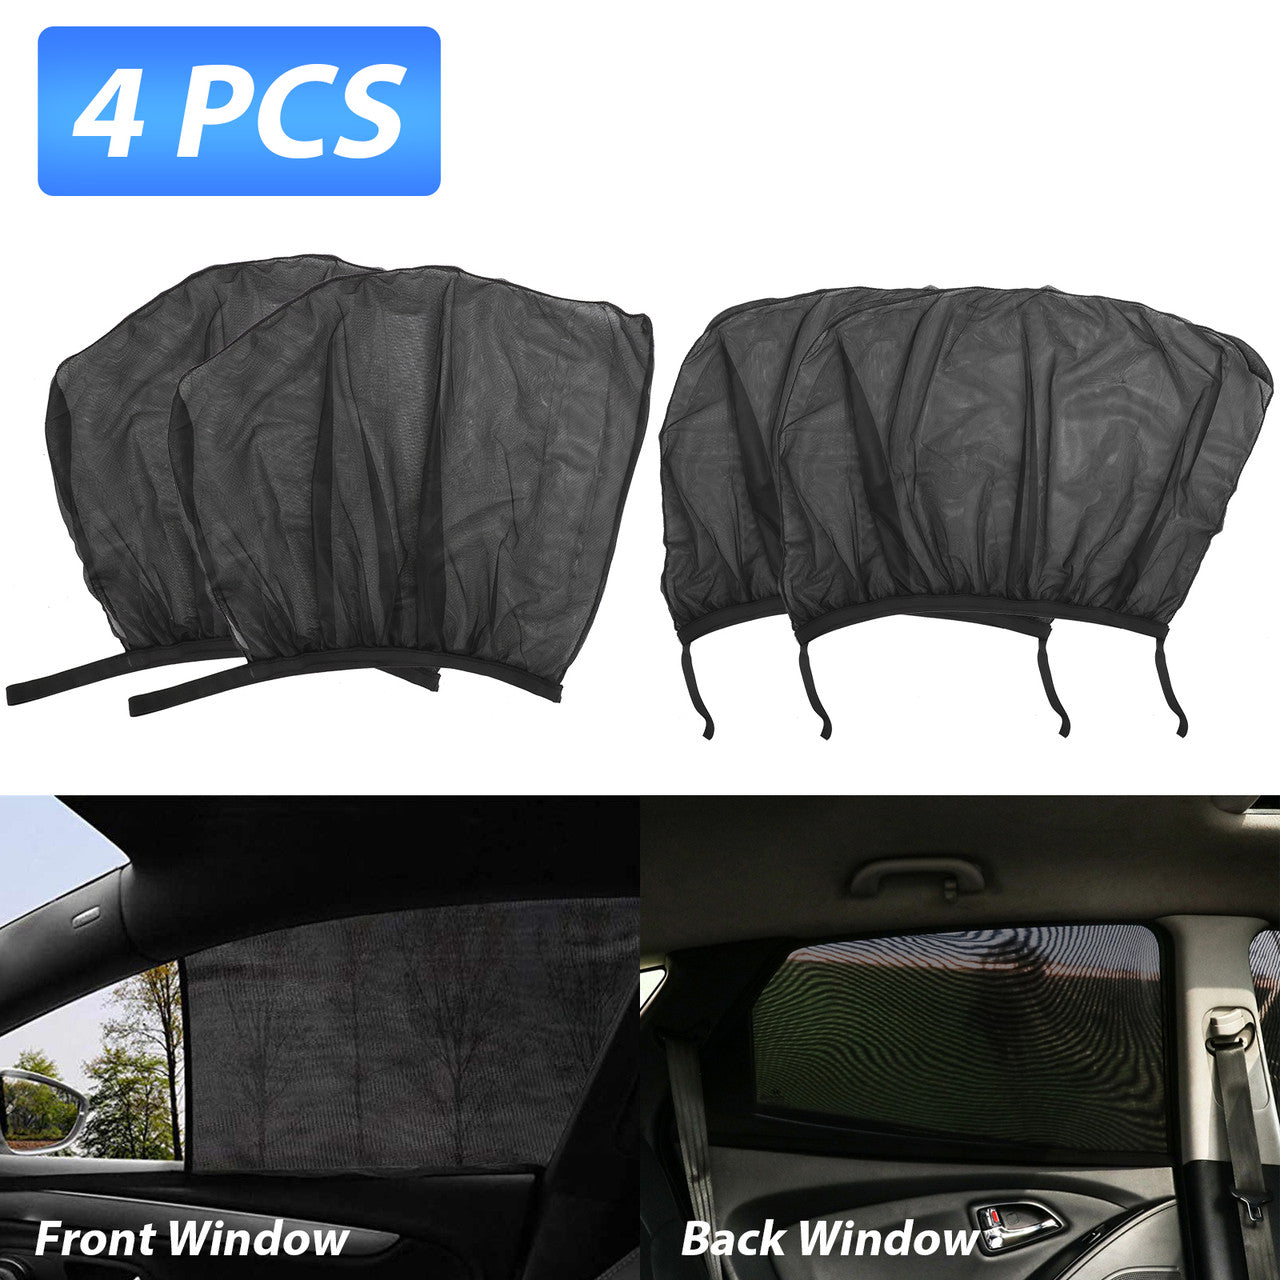 Car Sun Shade Vehicle Side Window for Baby Women Kid Pet Breathable Mesh Sun Shield in The Seat from UV Rays Fits Most SUVs and Cars(Side Window Shade 39.4x19.7&44.5x20.5''), 4pcs